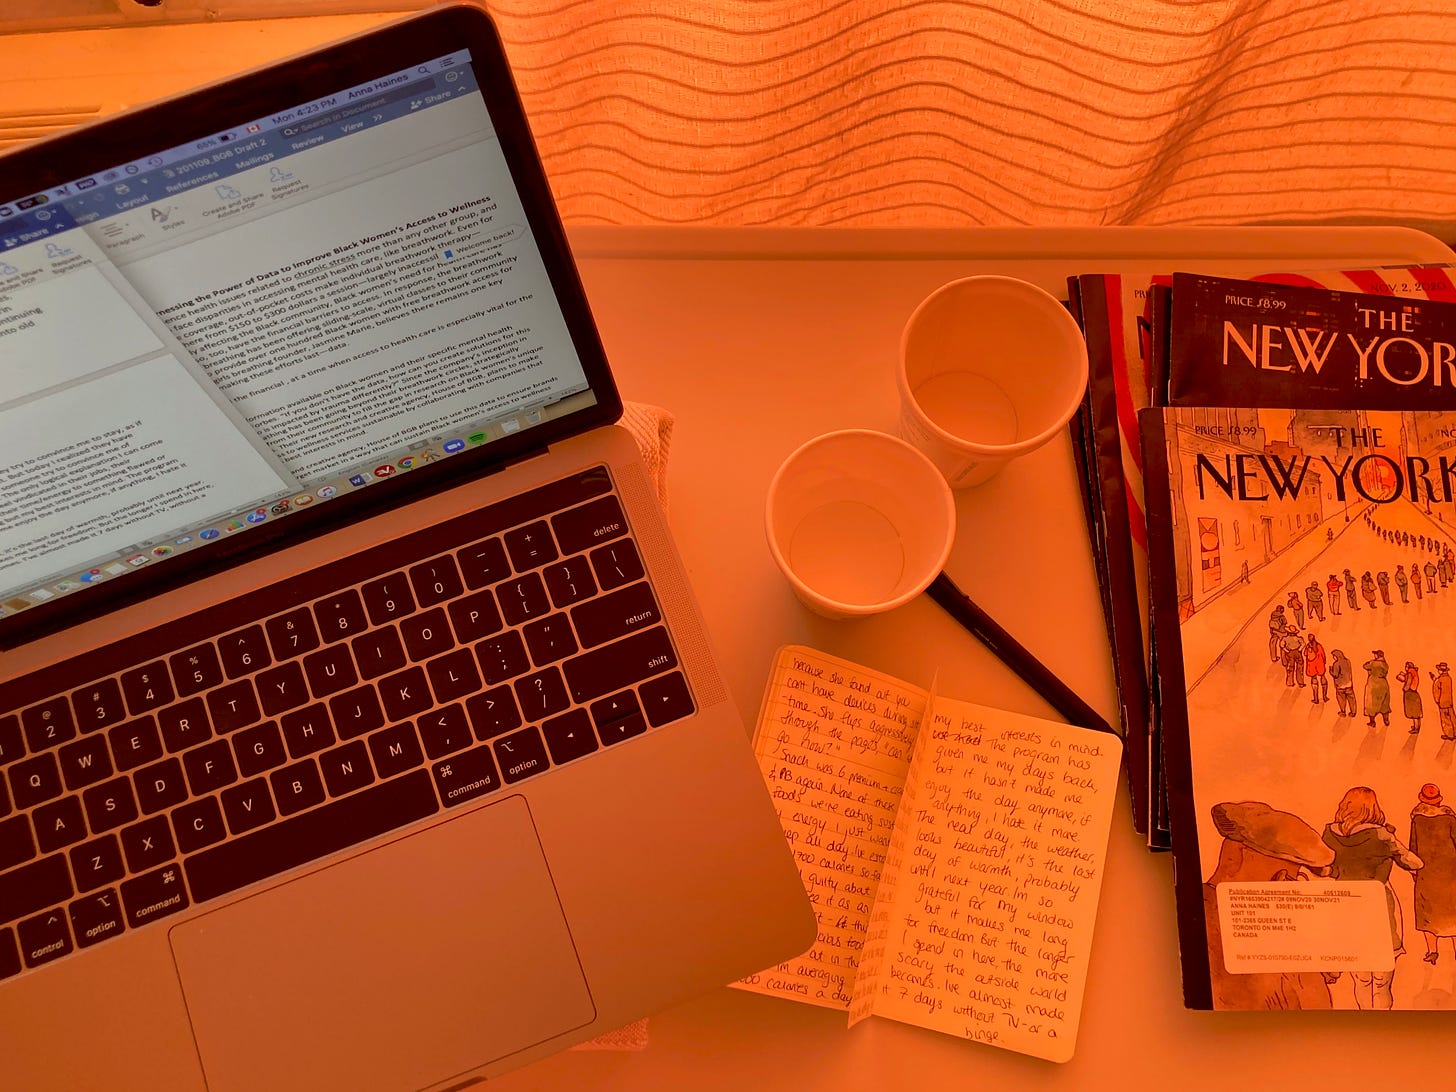 Aerial view of a laptop, two empty paper cups, an open journal and a stack of New Yorker magazines.